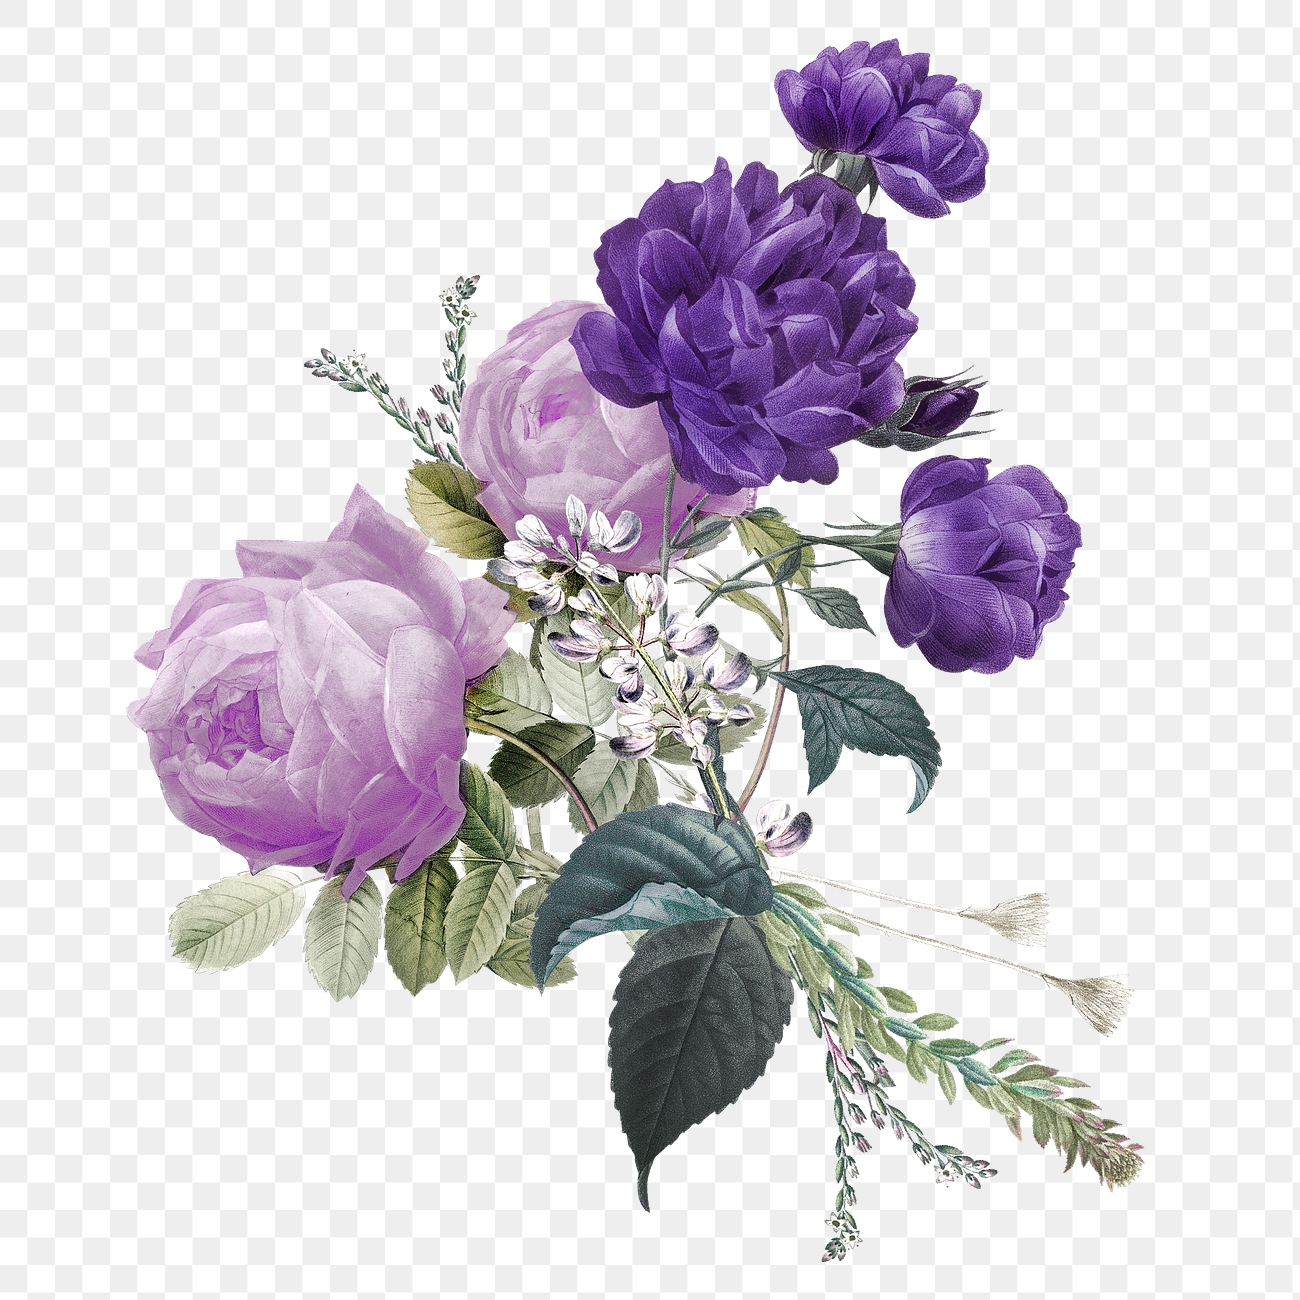 Purple roses bouquet png hand drawn vintage… | Free stock illustration ...